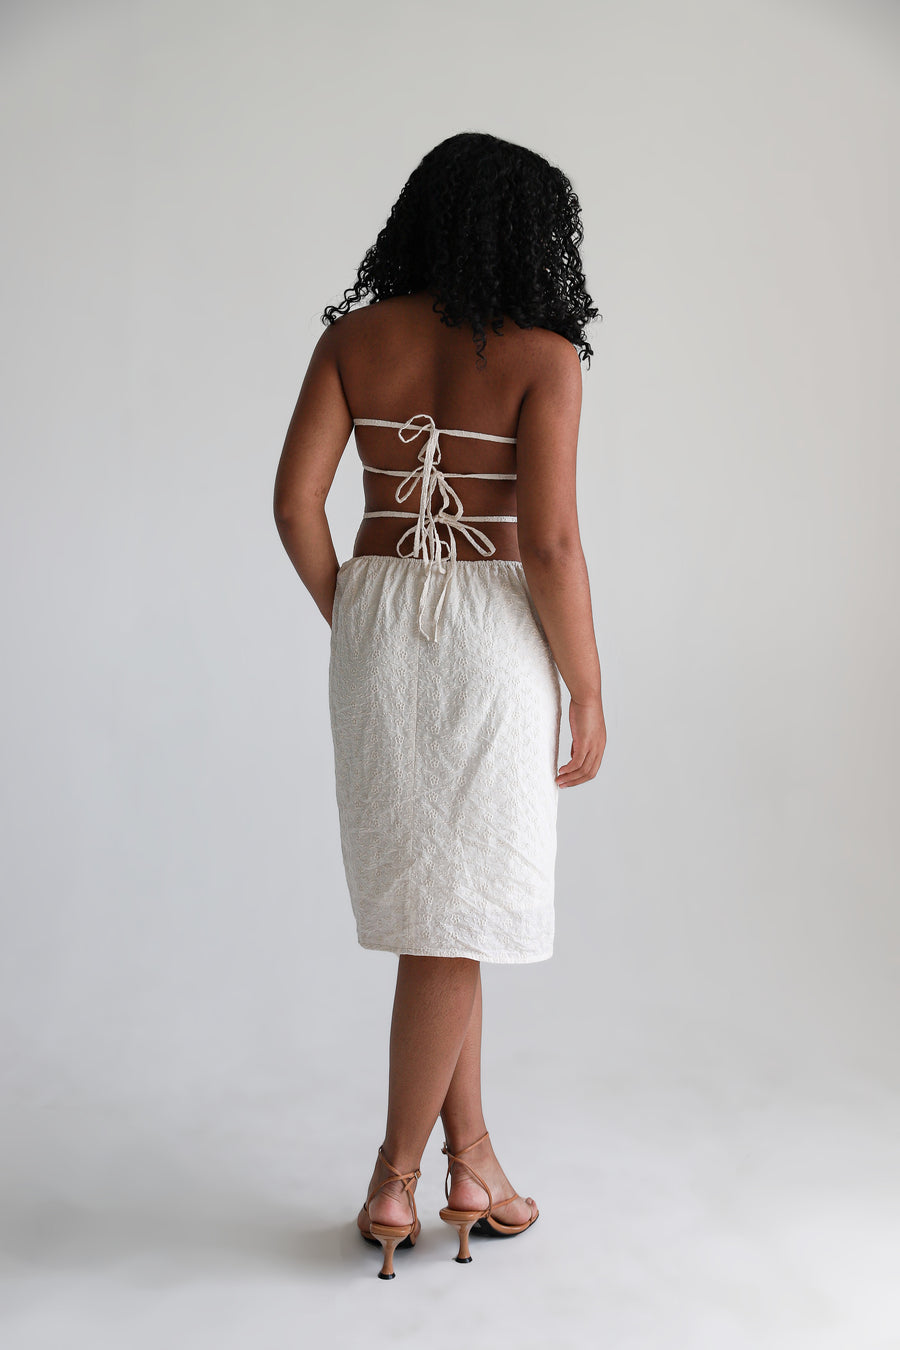 Model showing the back of the dress.